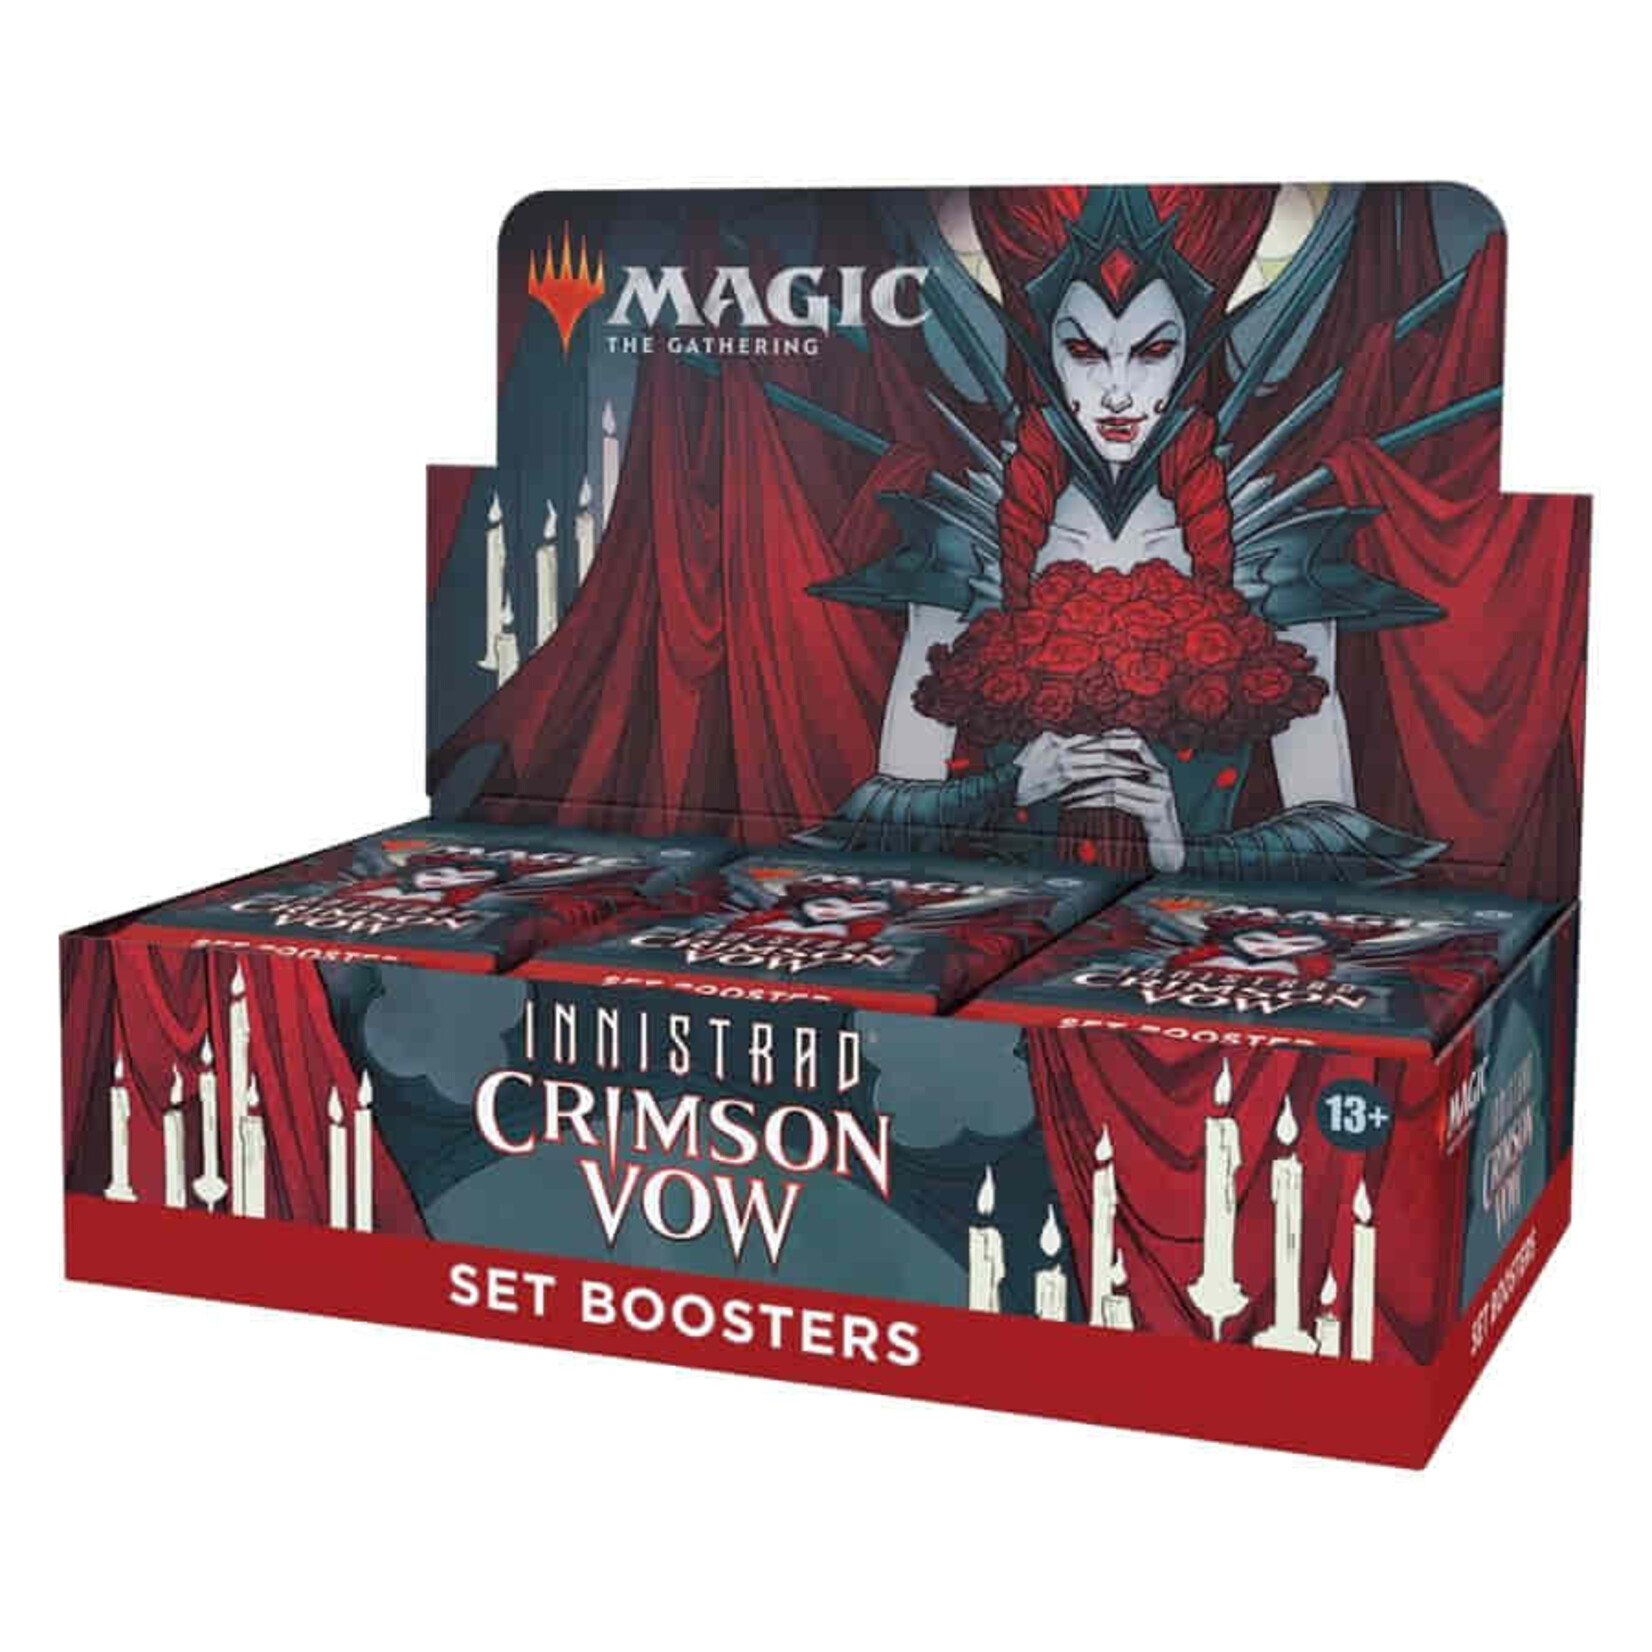 Wizards of the Coast Magic the Gathering: Crimson Vow Set Booster Box